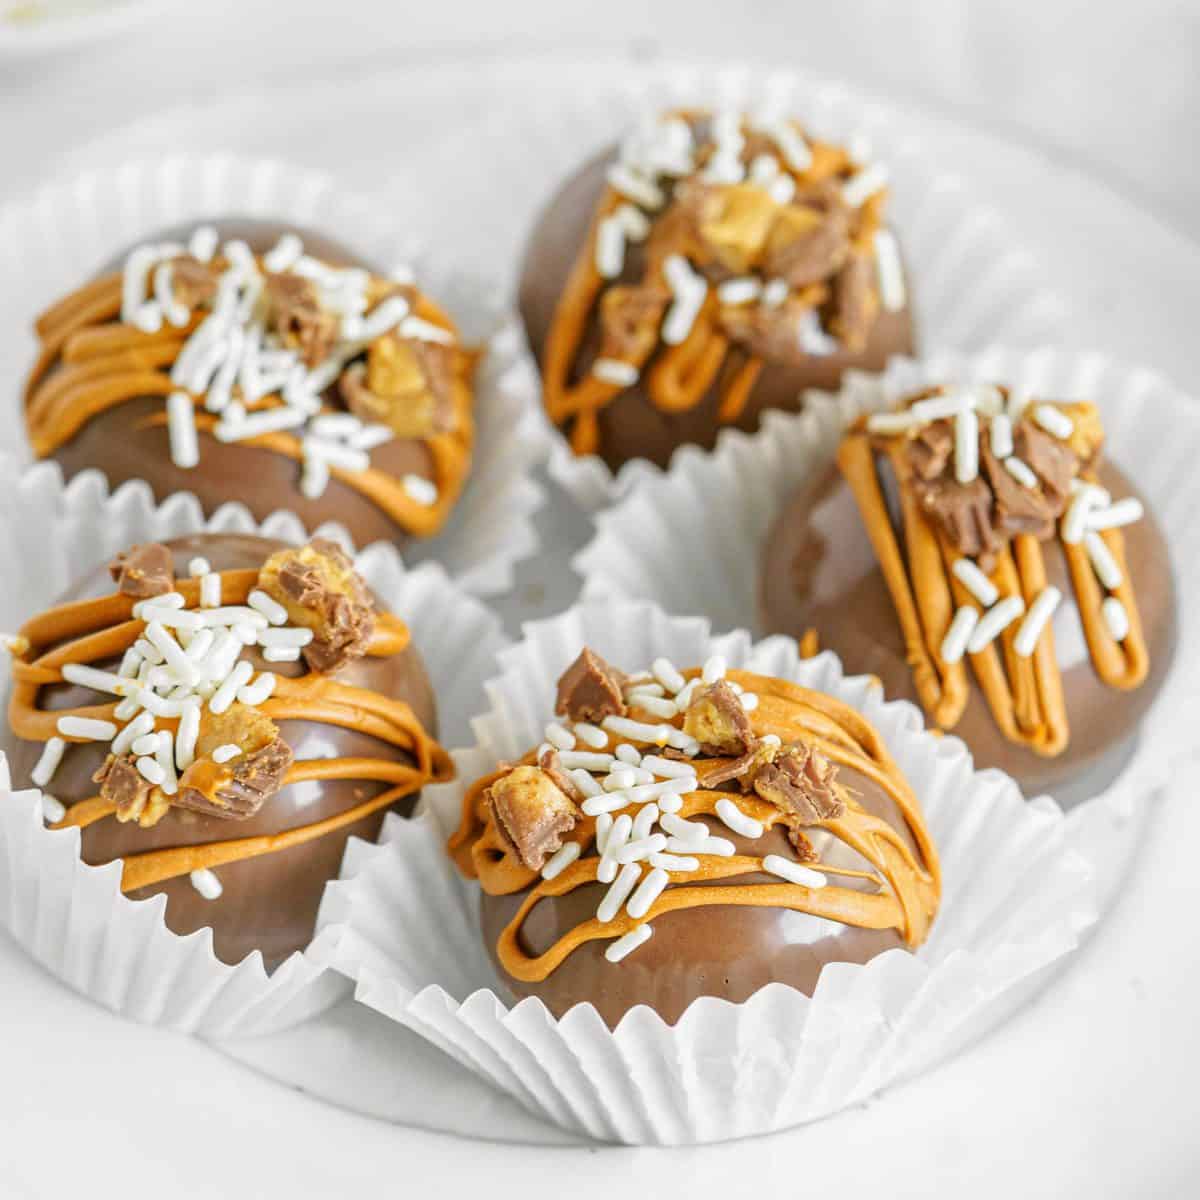 Square image of Chocolate Peanut Butter Hot Cocoa Bombs in paper liners on white plate.